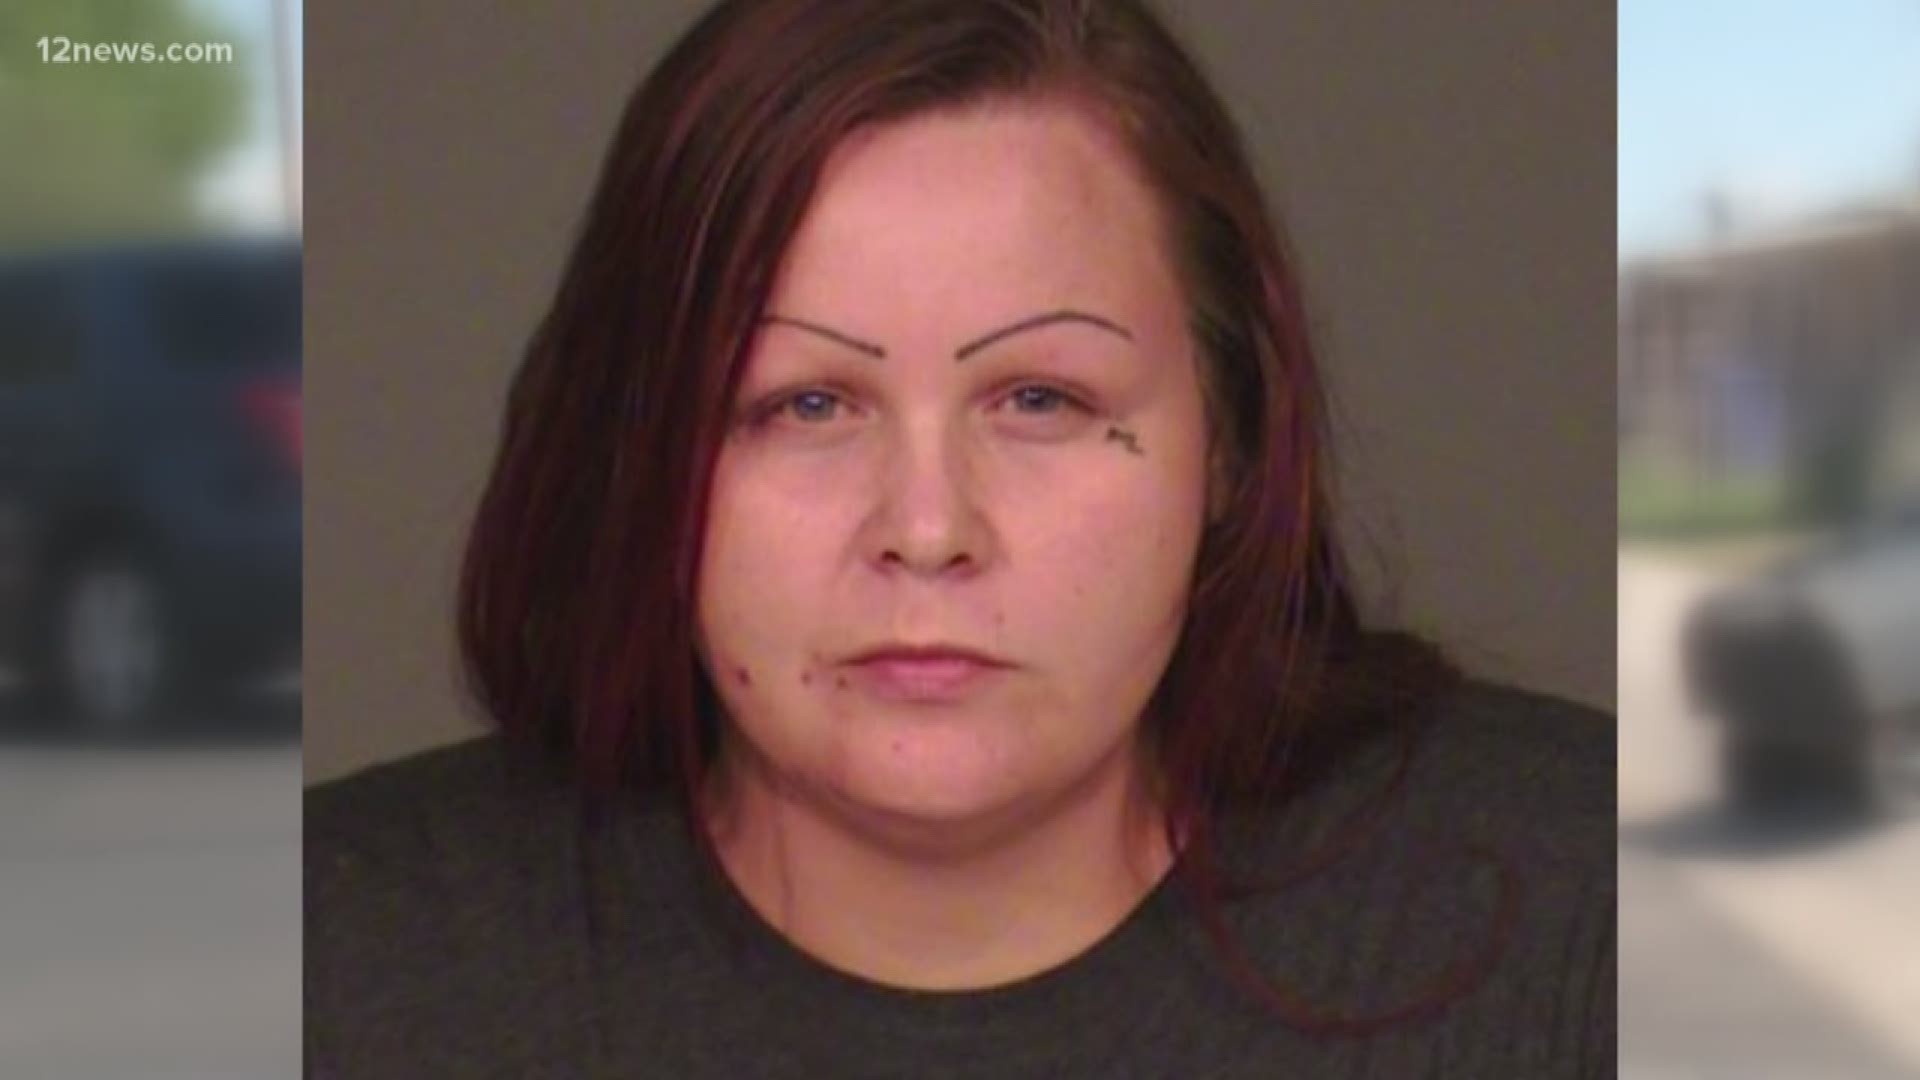 Jessica Vaughn was arrested on charges of aggravated assault, high and run, and theft following an incident at Chandler High School in September. She hit multiple vehicles in the parking lot before taking aim at a school resource officer.